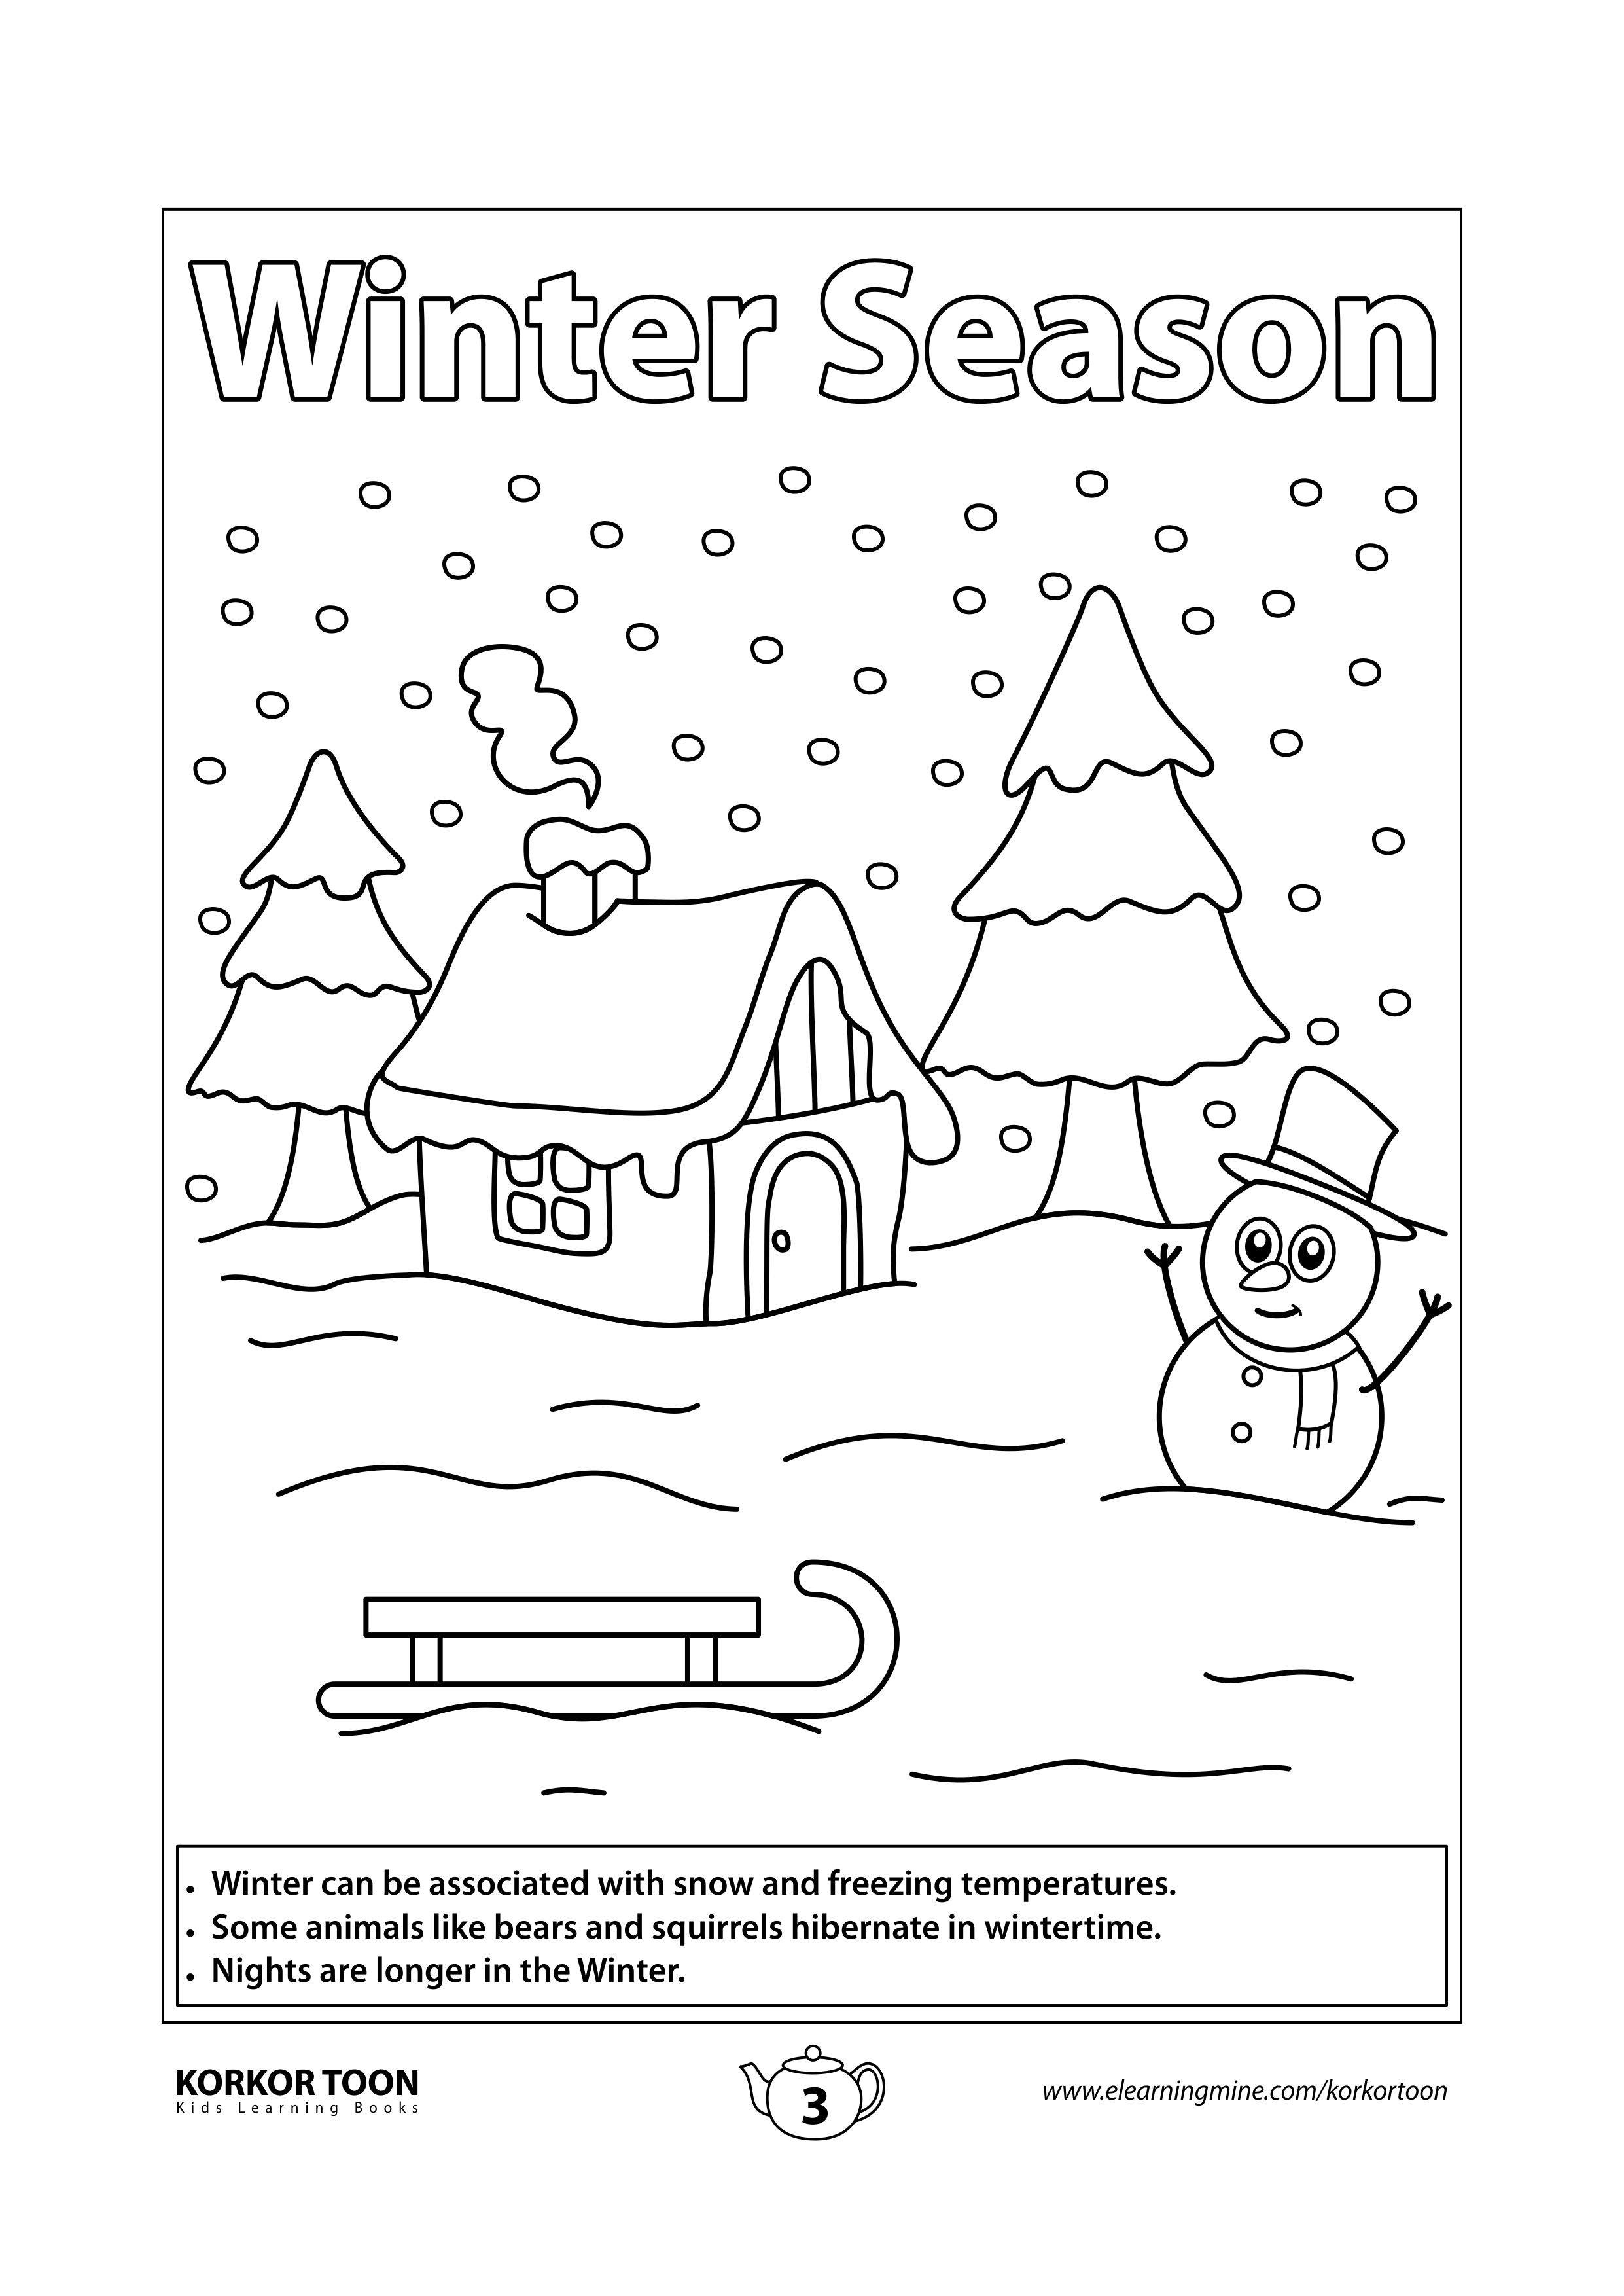 Seasons coloring book for kids winter season coloring page seasons worksheets coloring books kindergarten coloring pages